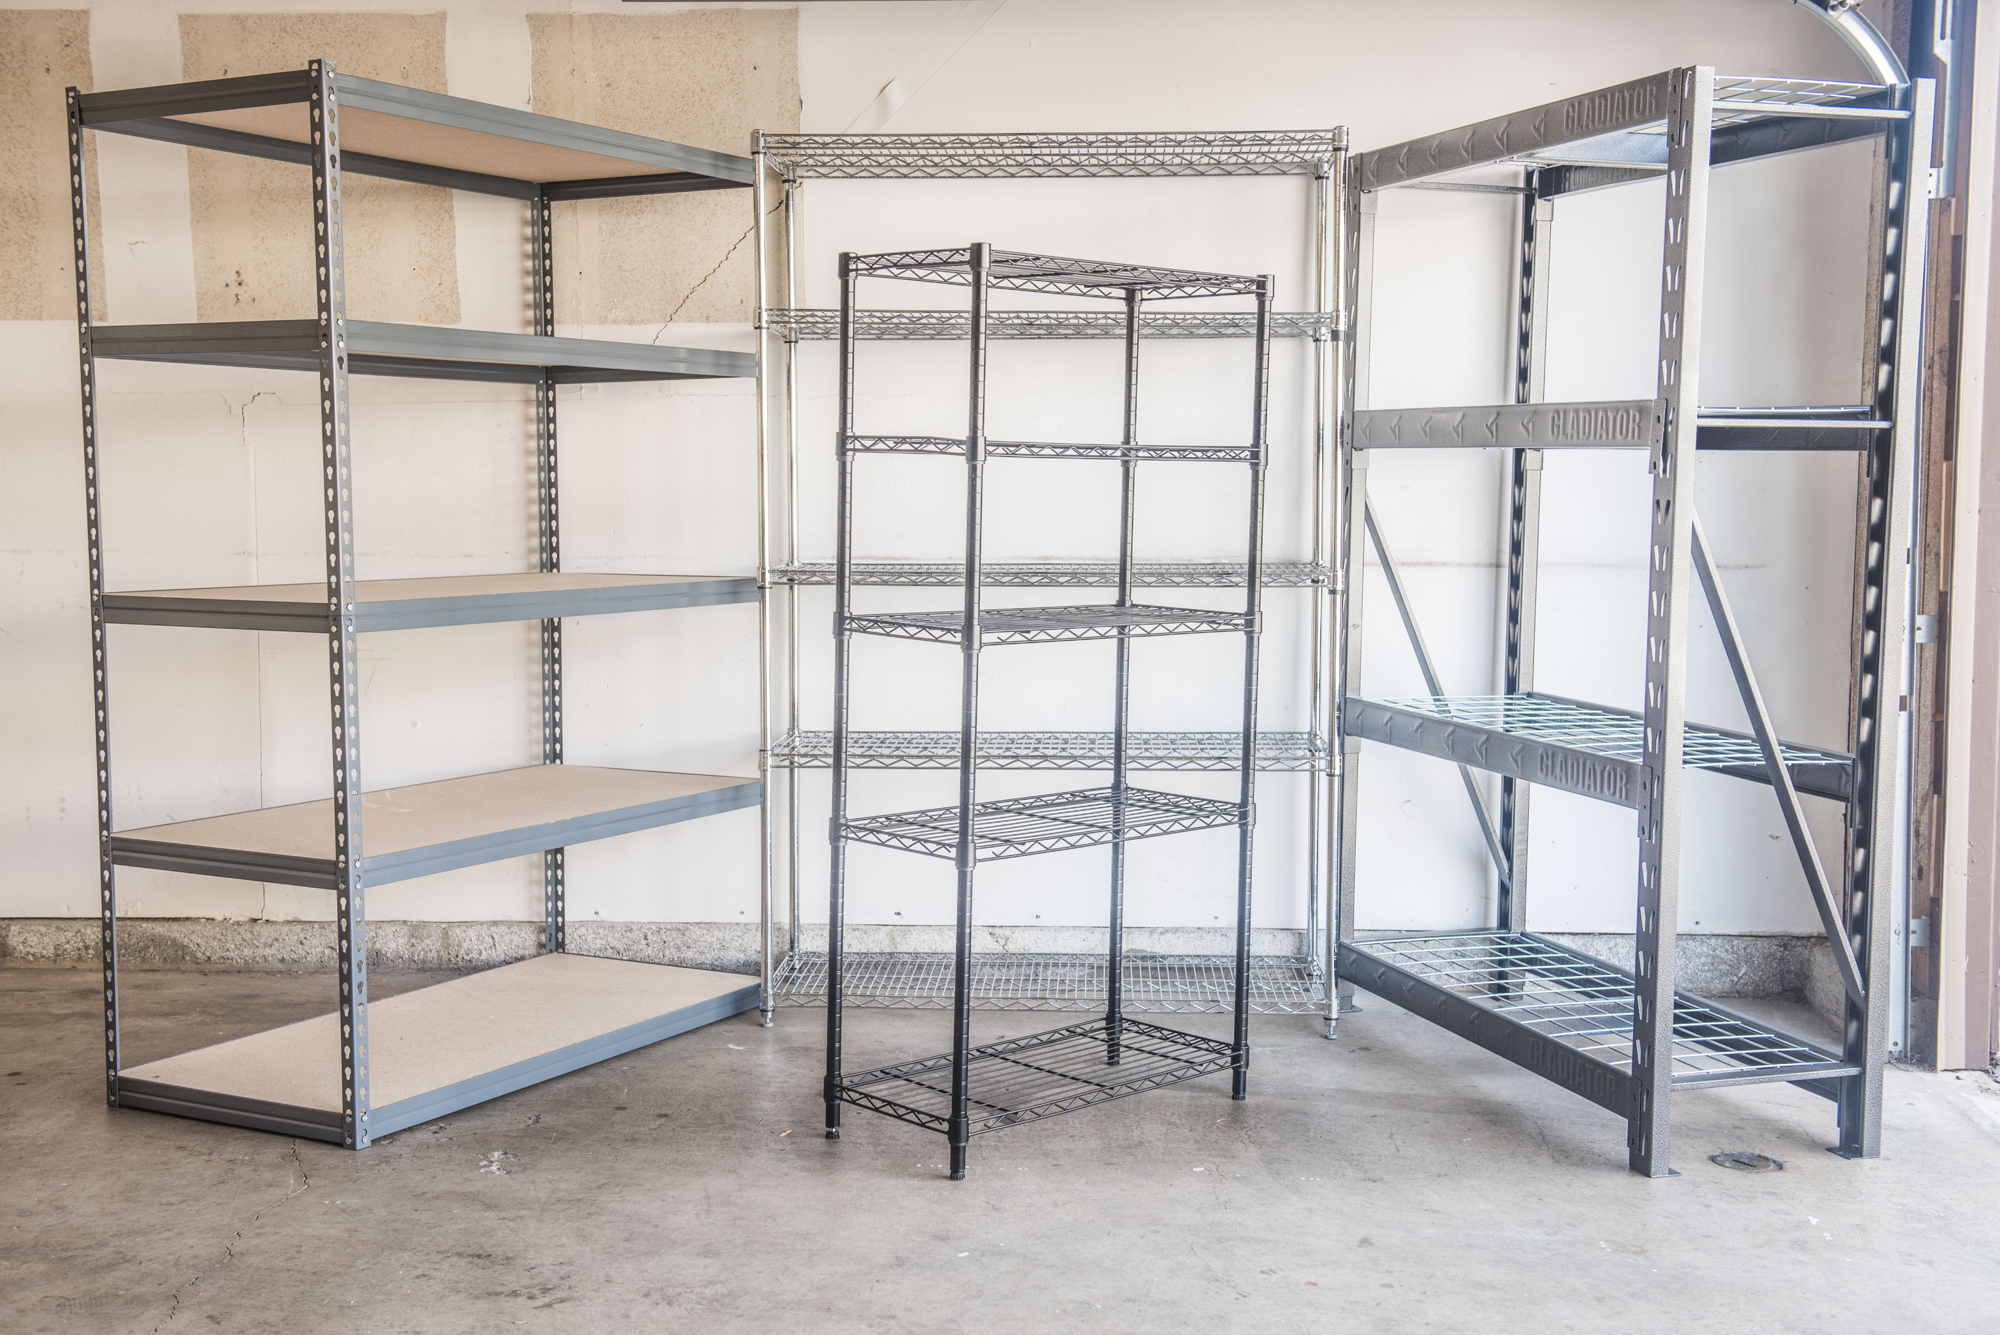 The Best Garage Shelving Of 2022, How To Build Heavy Duty Shelves In Garage